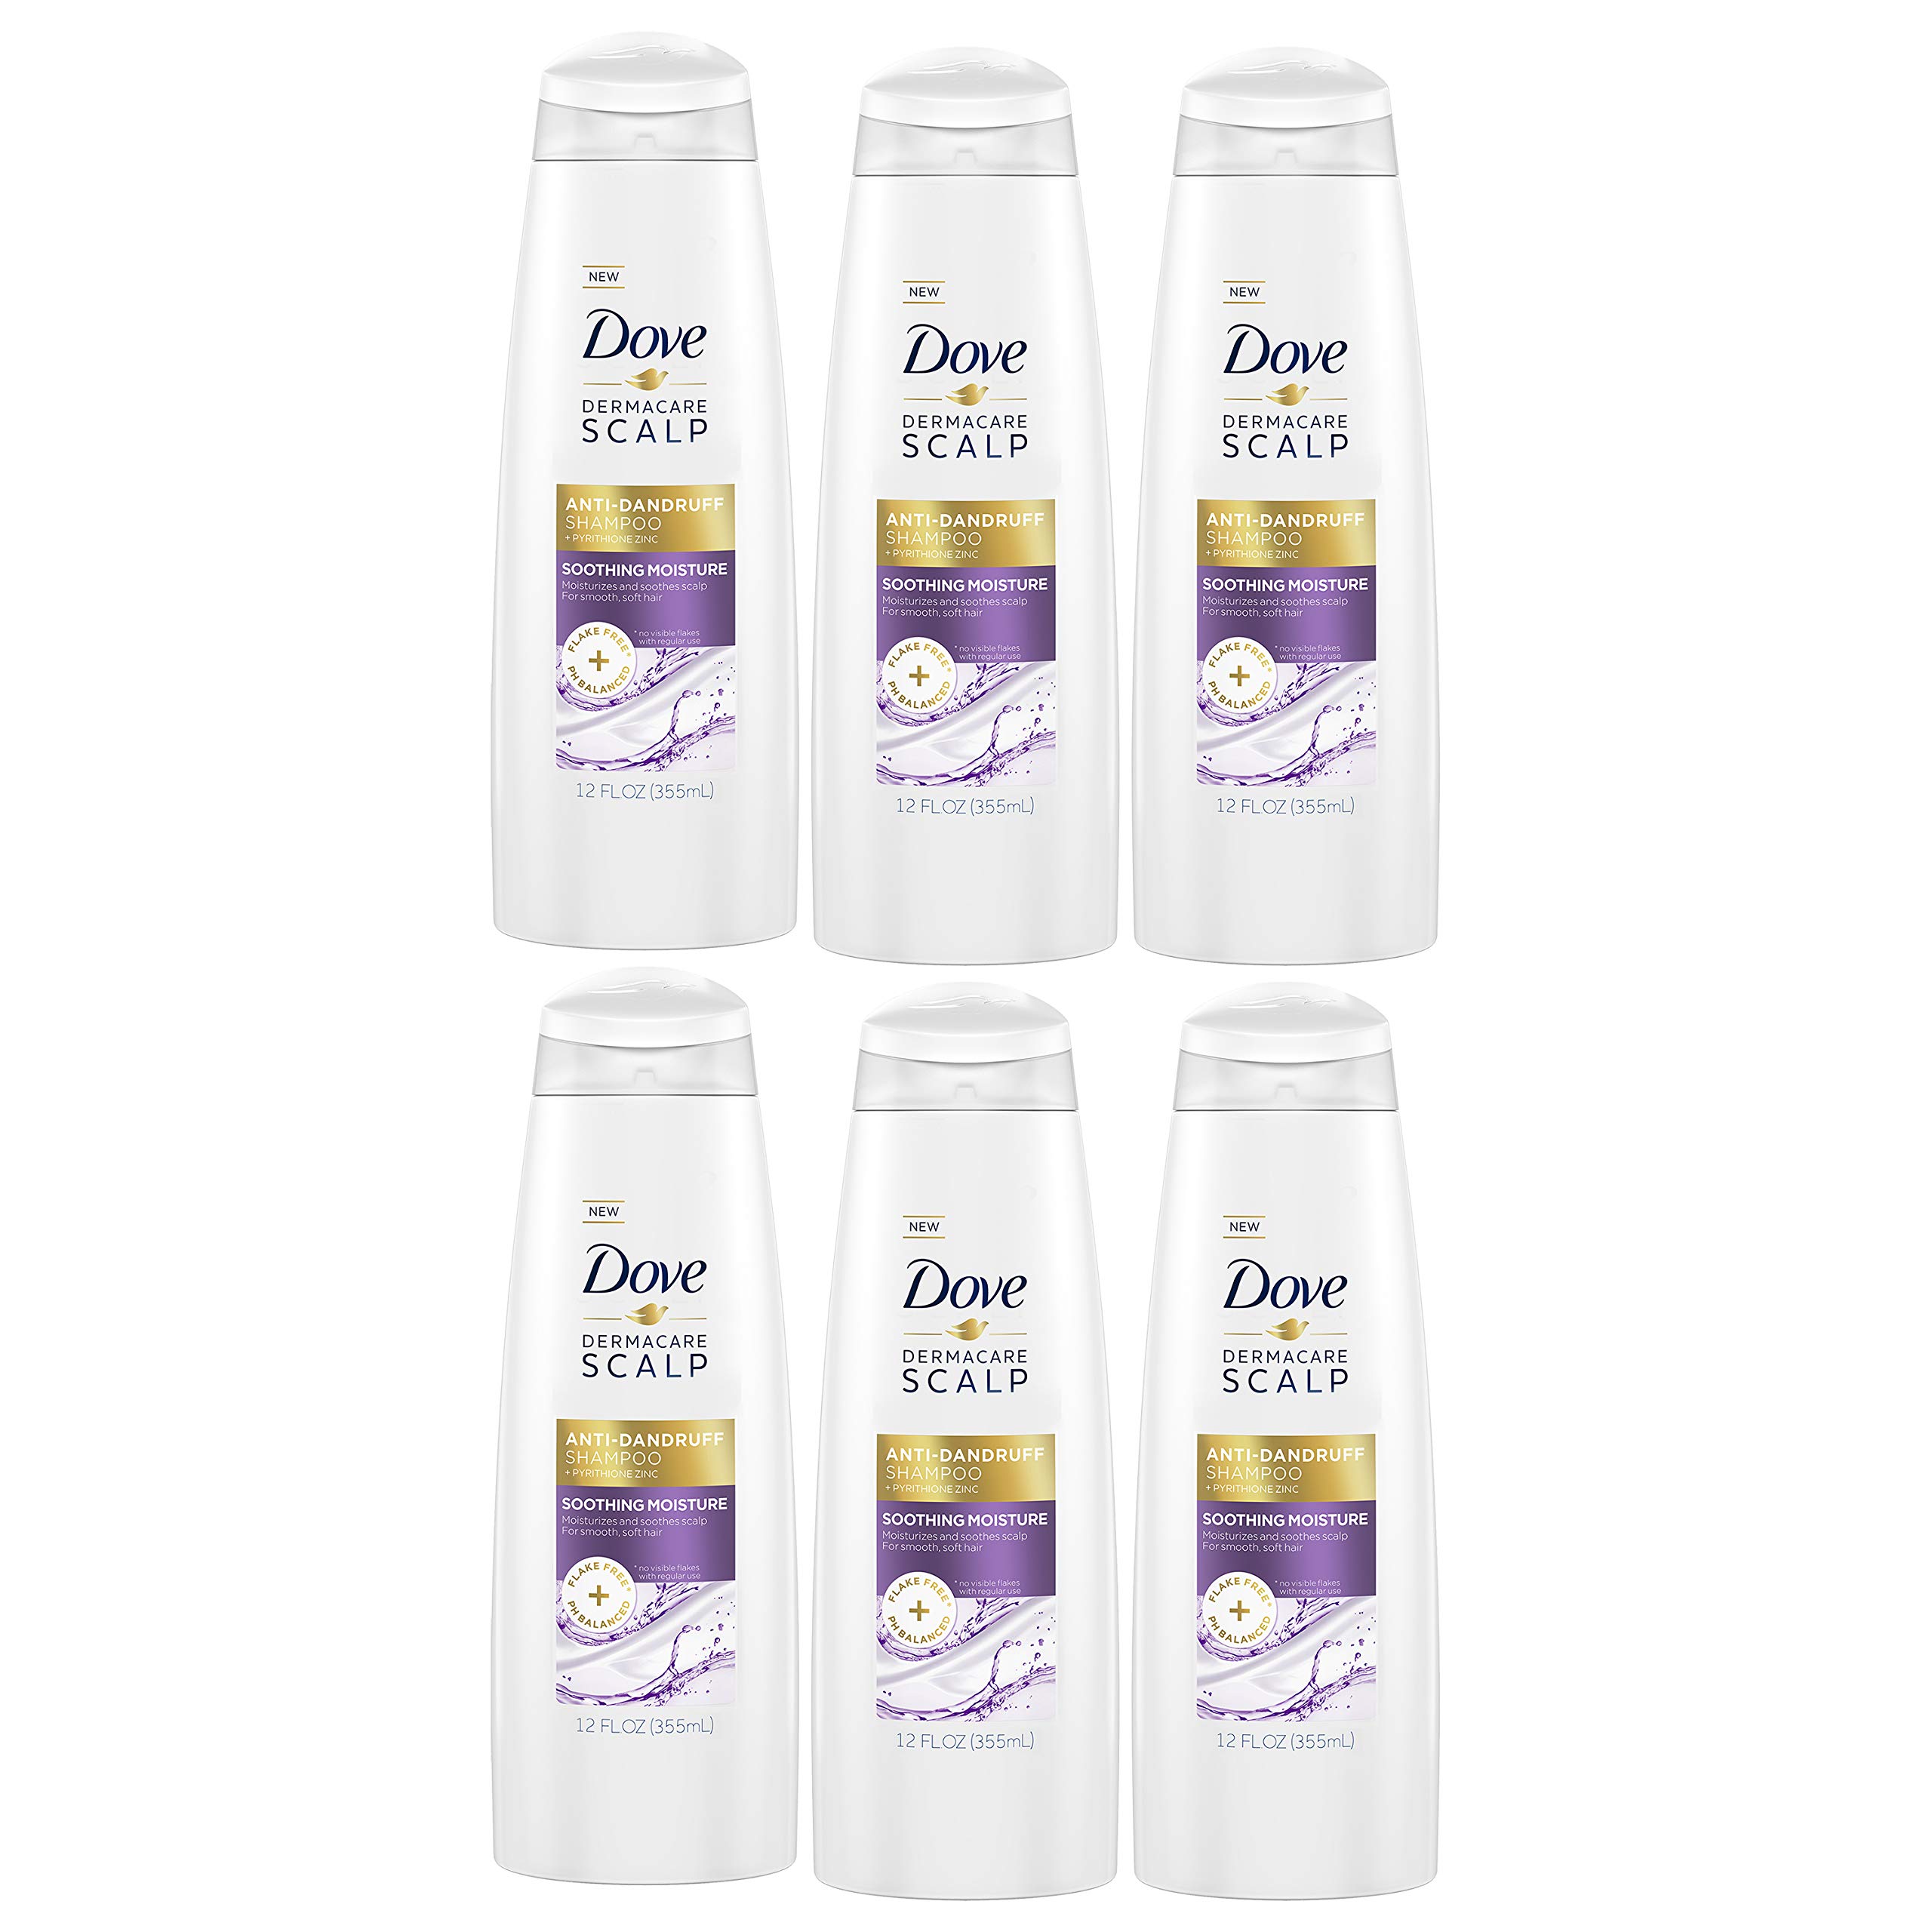 Dove Dermacare Scalp Anti-Dandruff Shampoo Soothing Moisture 12 oz Pack Of 6